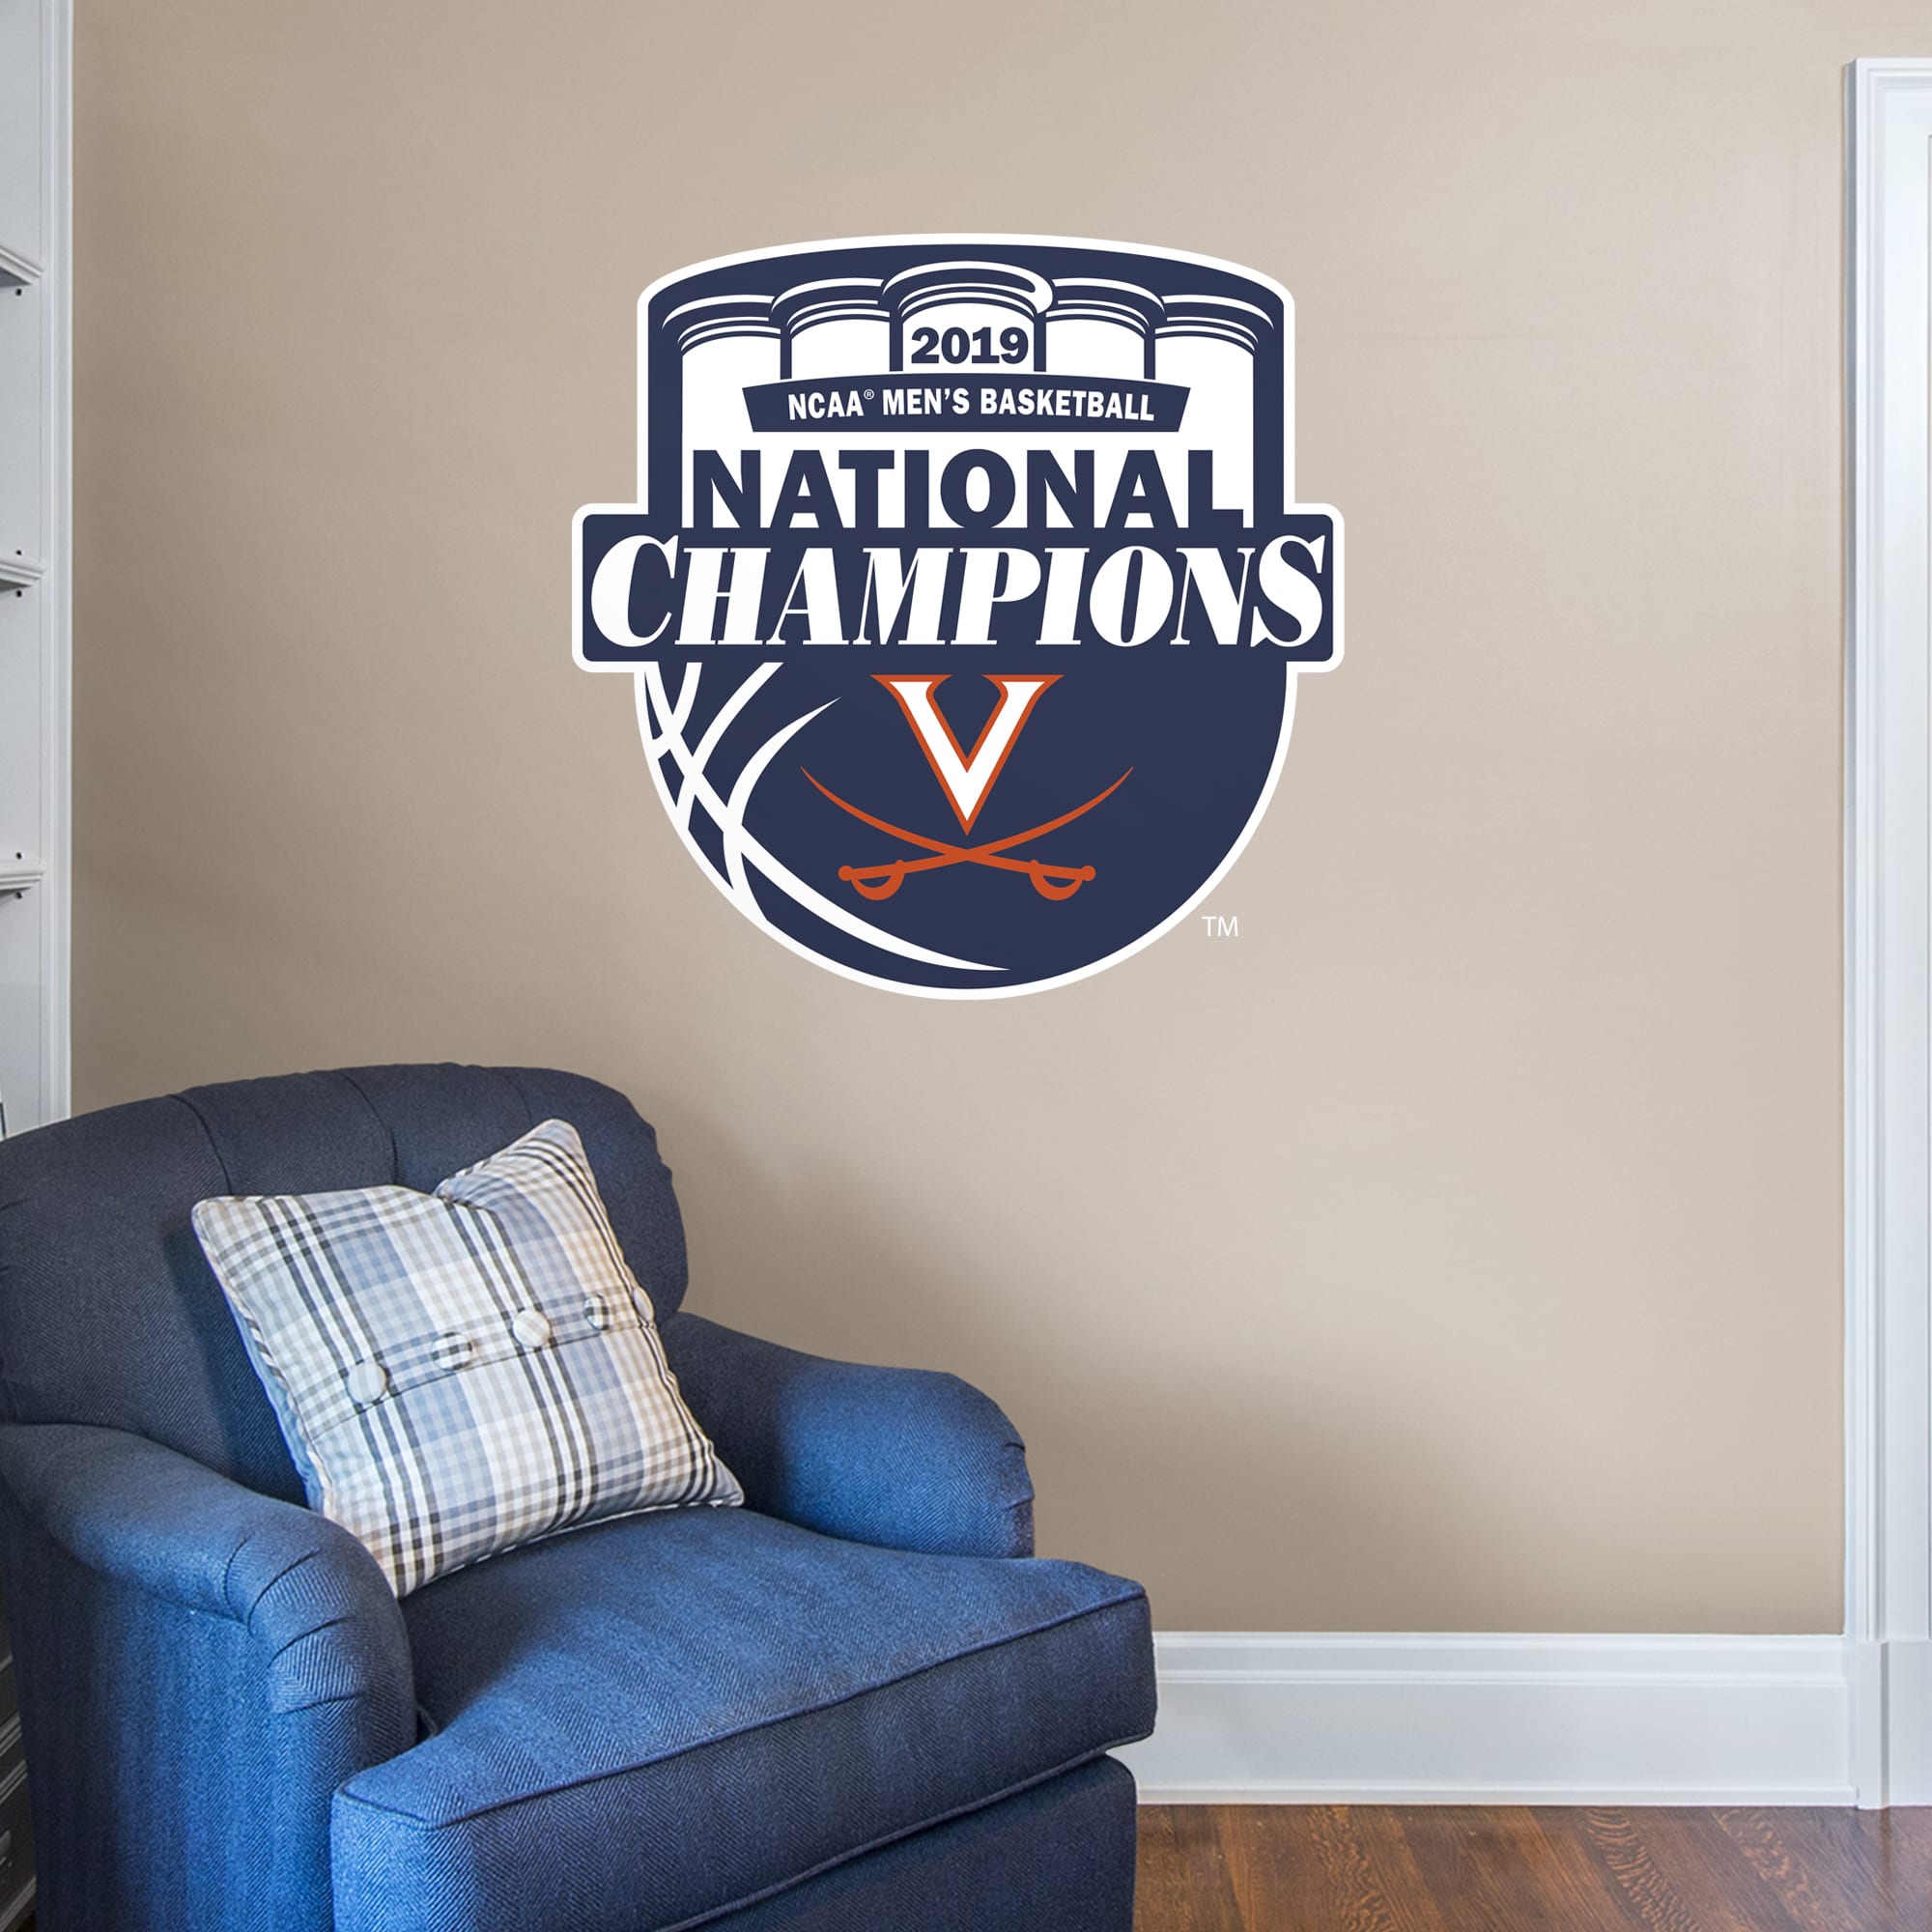 Virginia Cavaliers: 2019 Mens Basketball National Champions Logo - Officially Licensed Removable Wall Decal Giant Logo (39"W x